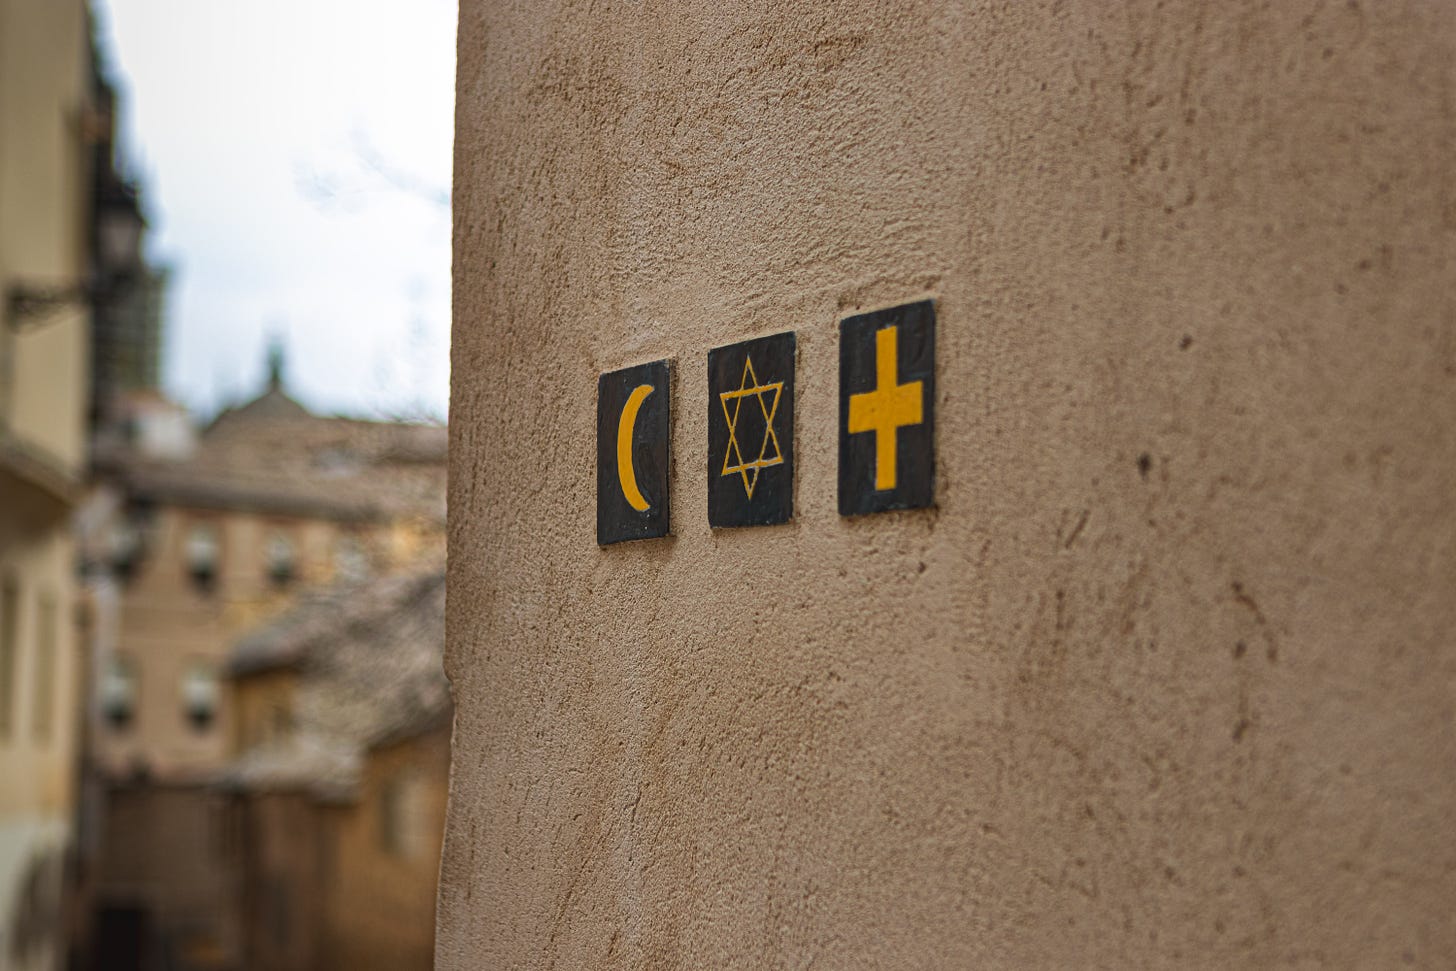 Symbols of a crescent, star and cross on a a wall.